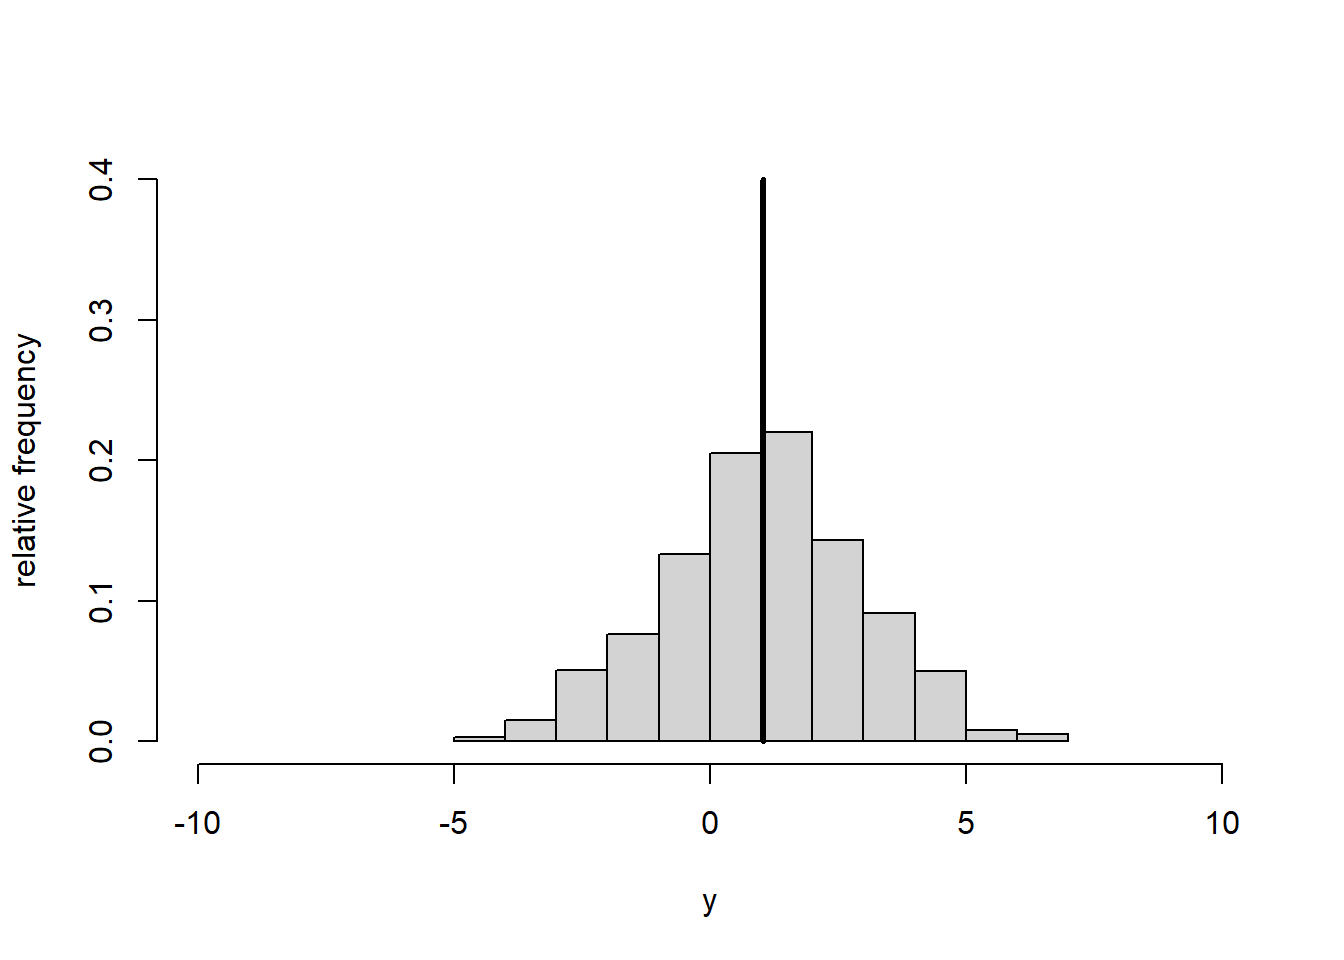 Histogram of dataset $y$ (left) and centred dataset $y^*$ (right). The vertical line represents the mean.